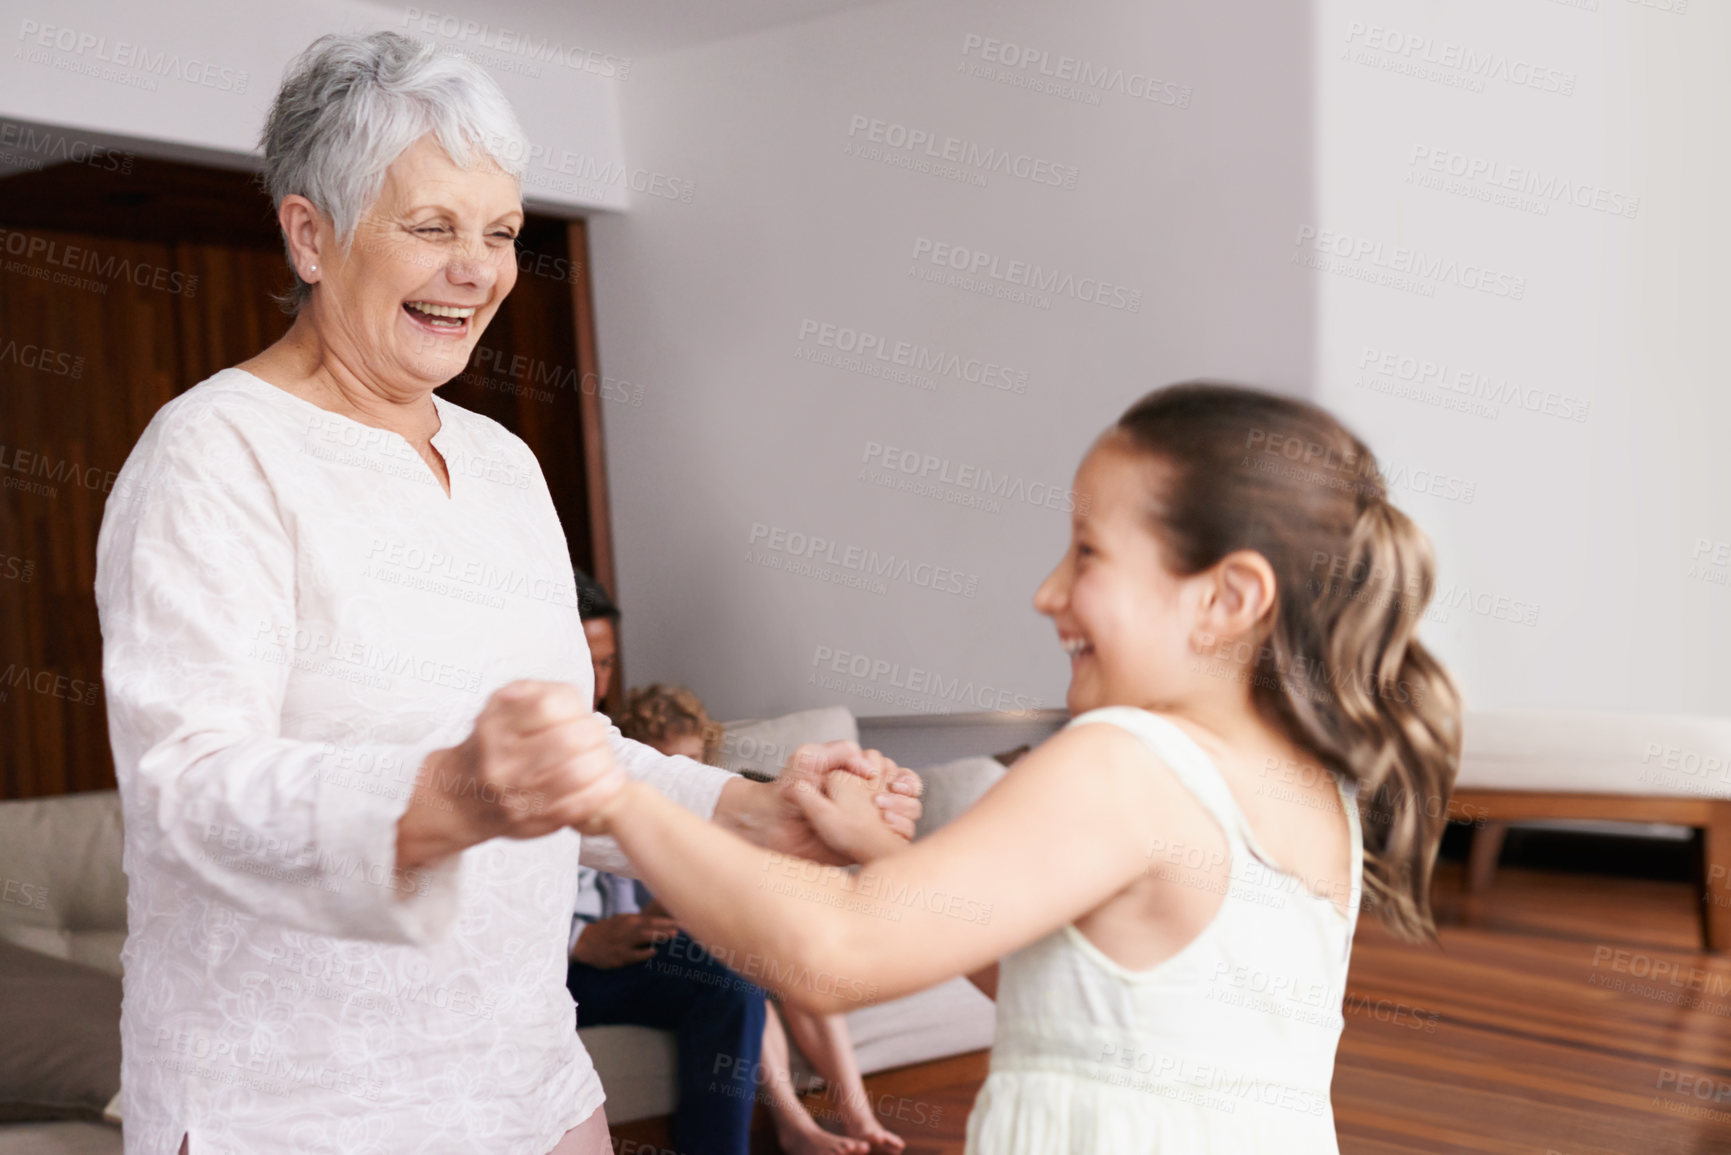 Buy stock photo Holding hands, dance or happy grandmother with a child playing or laughing with joy in family home. Grandma dancing, kid smiling or funny old woman relaxing or bonding together in retirement or house